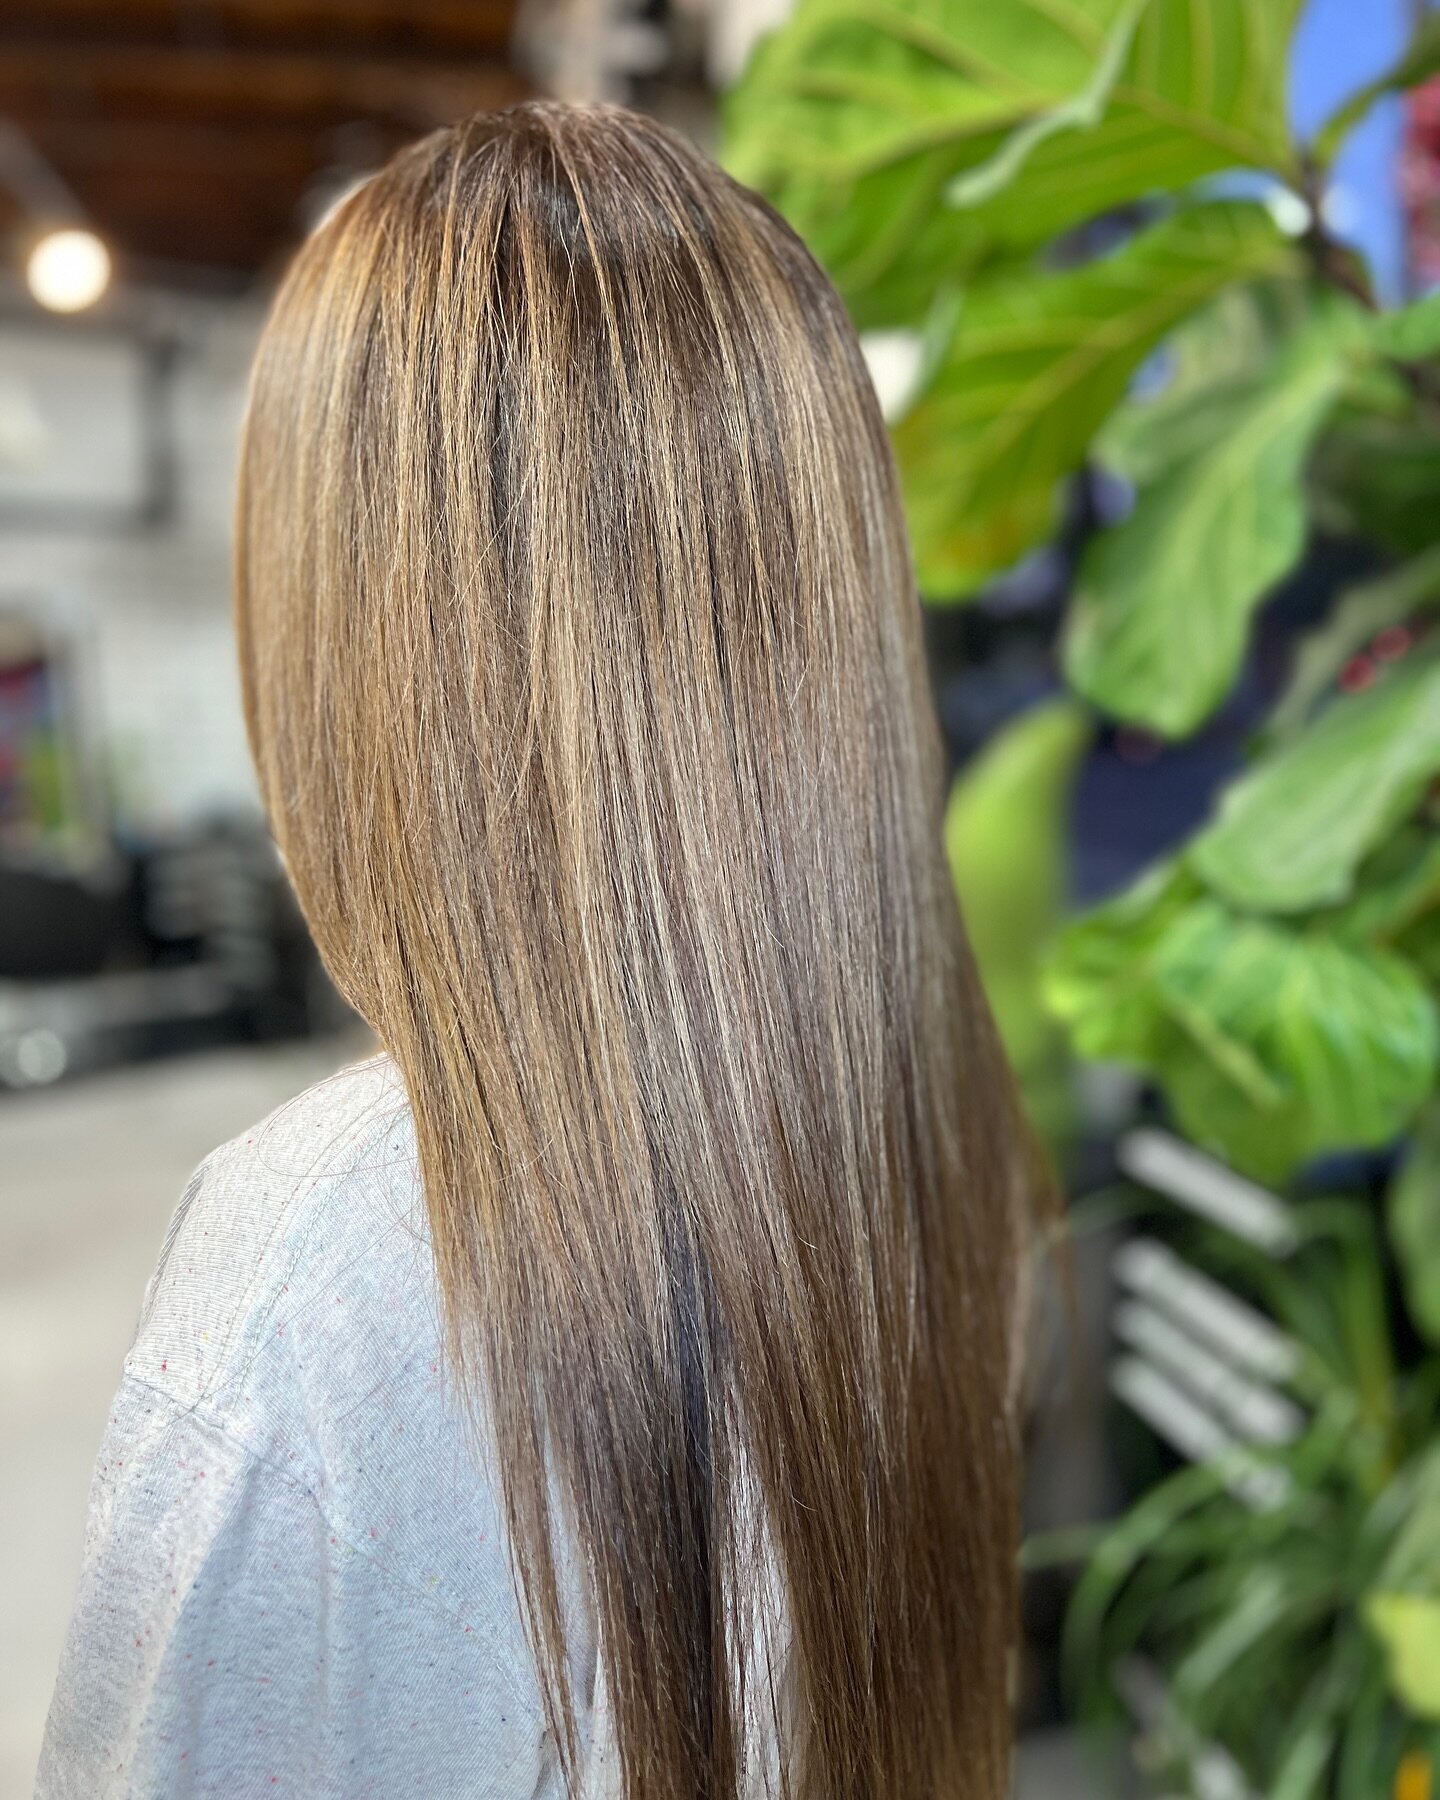 ✨ Spice up your look with fresh highlights and smoothing treatment! This client left our salon feeling fresh, fabulous, and ready to conquer the world. Ready for your transformation? Book your appointment now! Link in bio. 
.
.
.
.
.
.
.
.
.
@colorlo